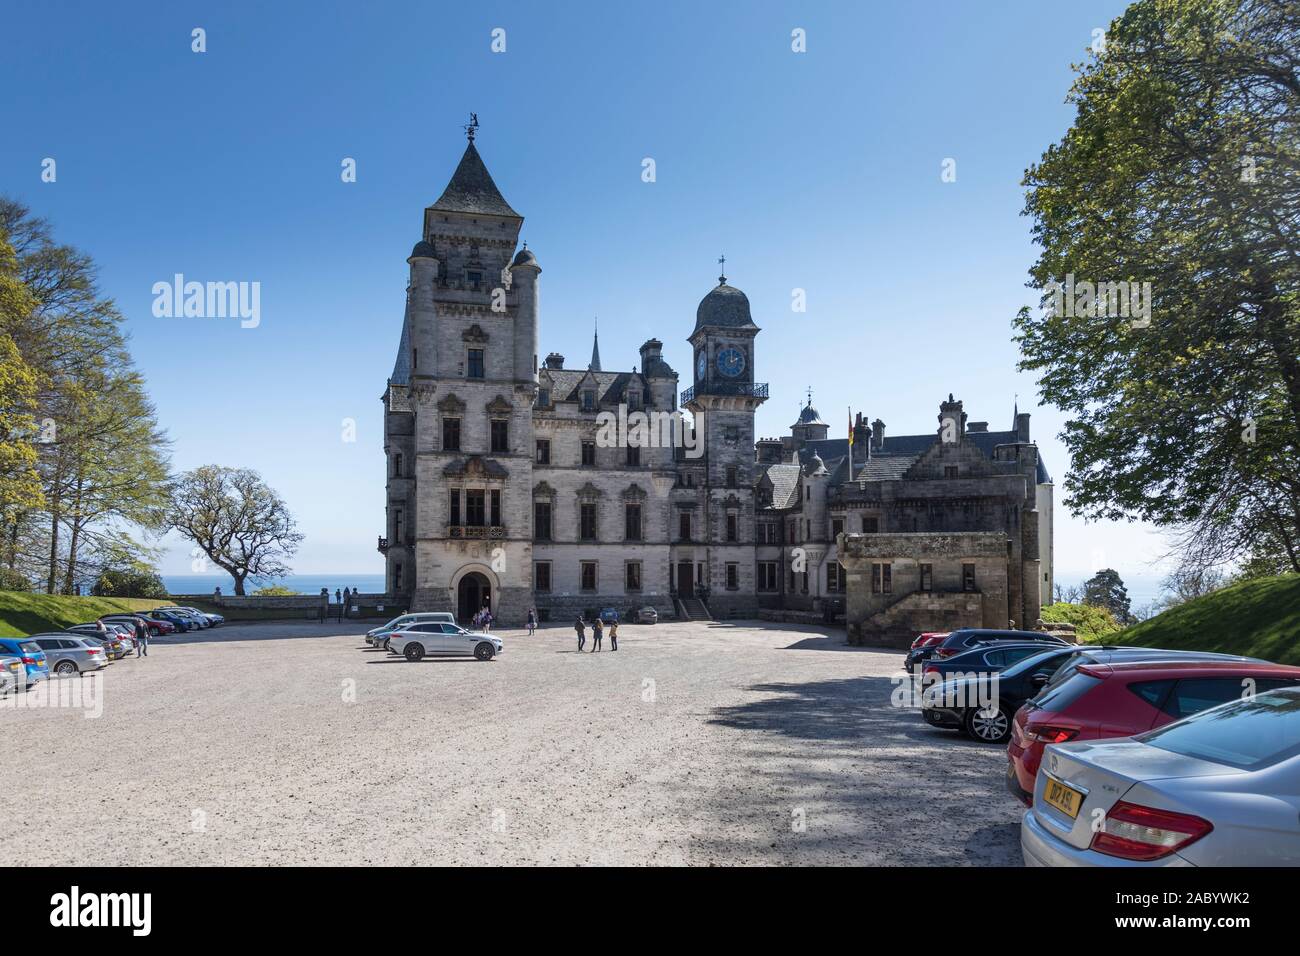 Front facade and entrance to Dunrobin Castle. The original castle was remodelled in 1845 by Sir Charles Barry changing it from a fort to a house in th Stock Photo